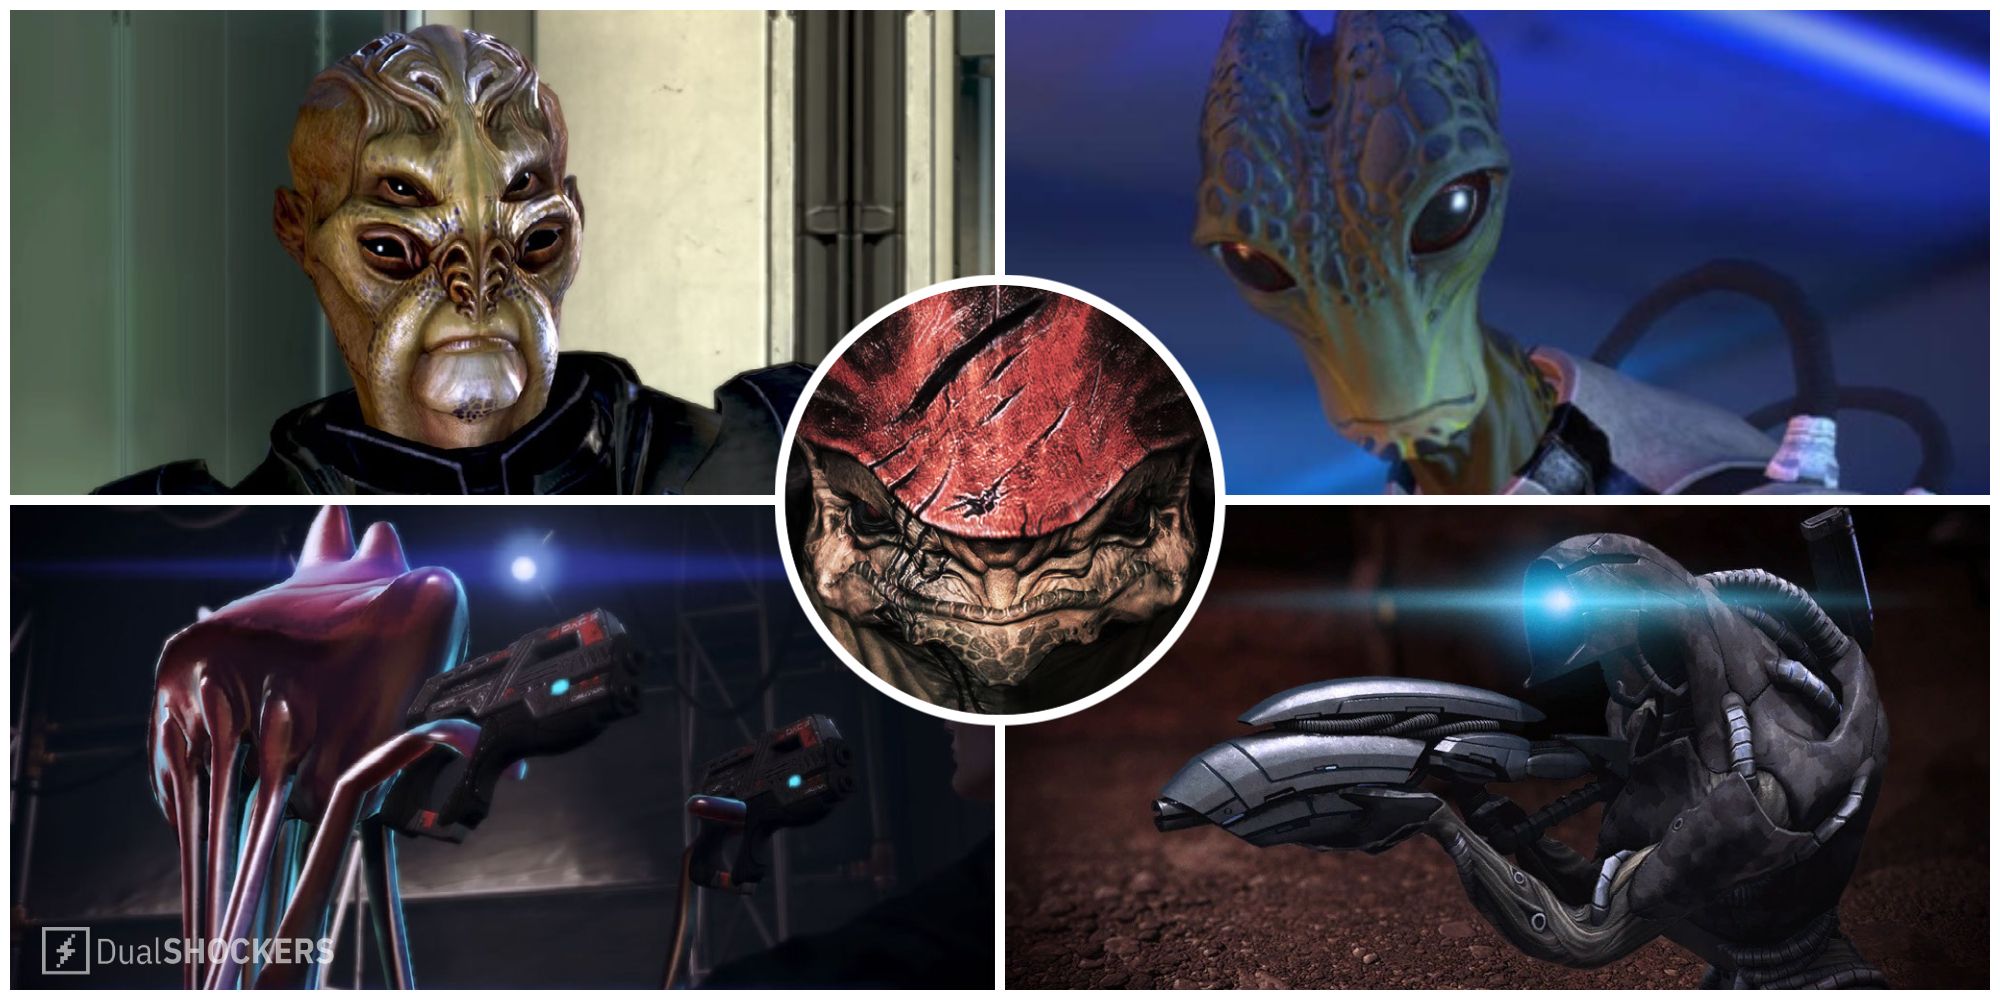 Mass Effect Legendary Edition races ranked from weakest to strongest